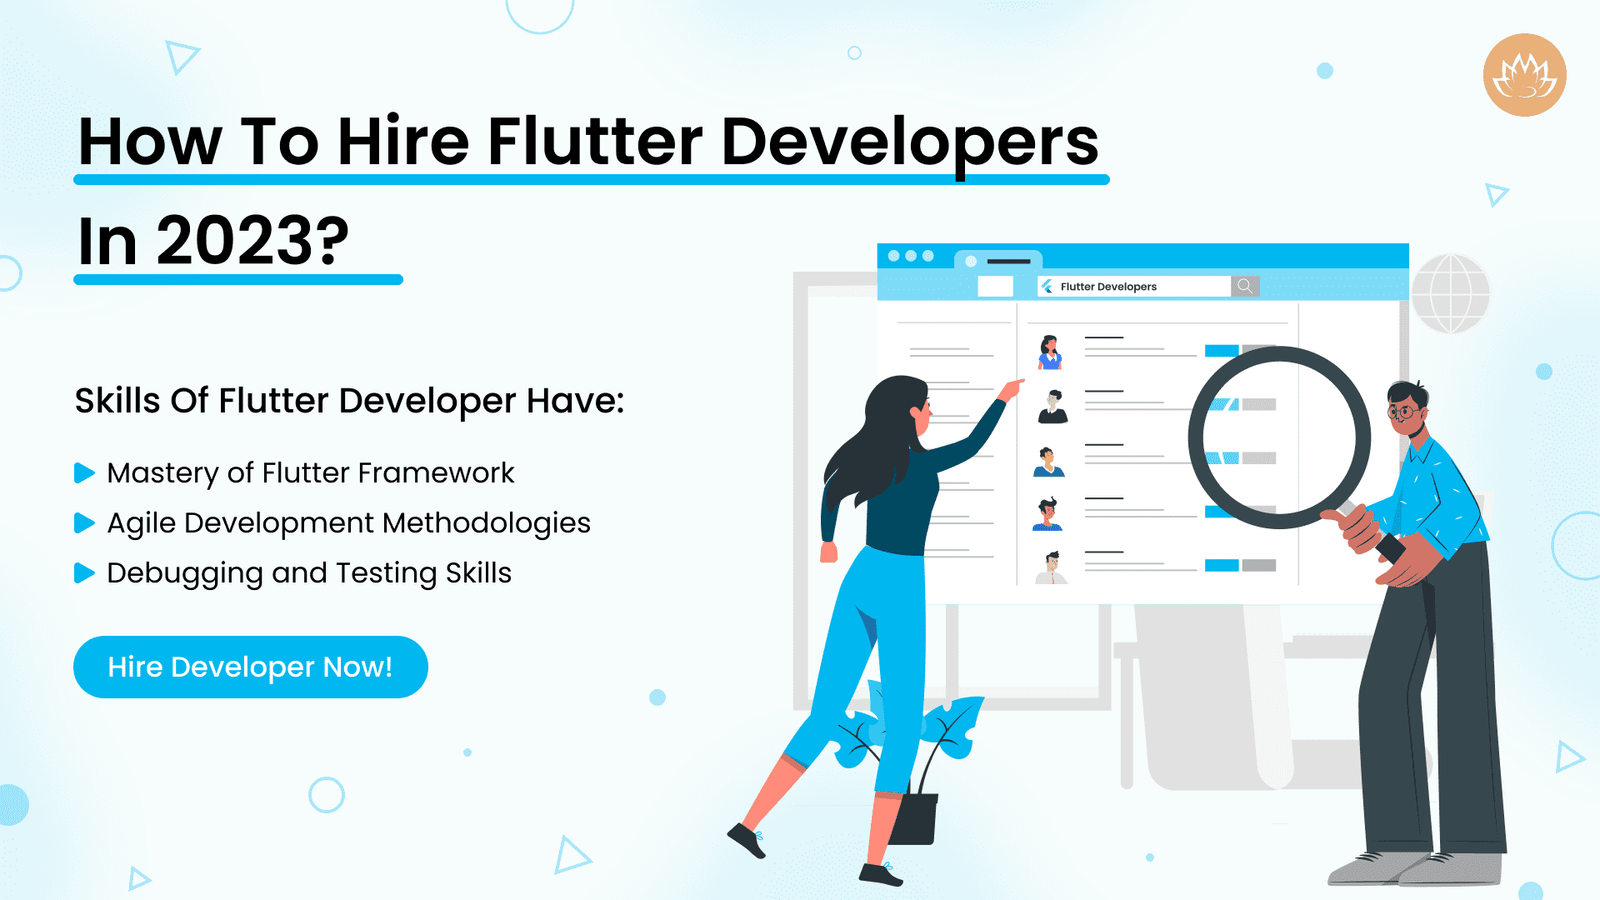 How To Hire Fluatter Developers In 2023